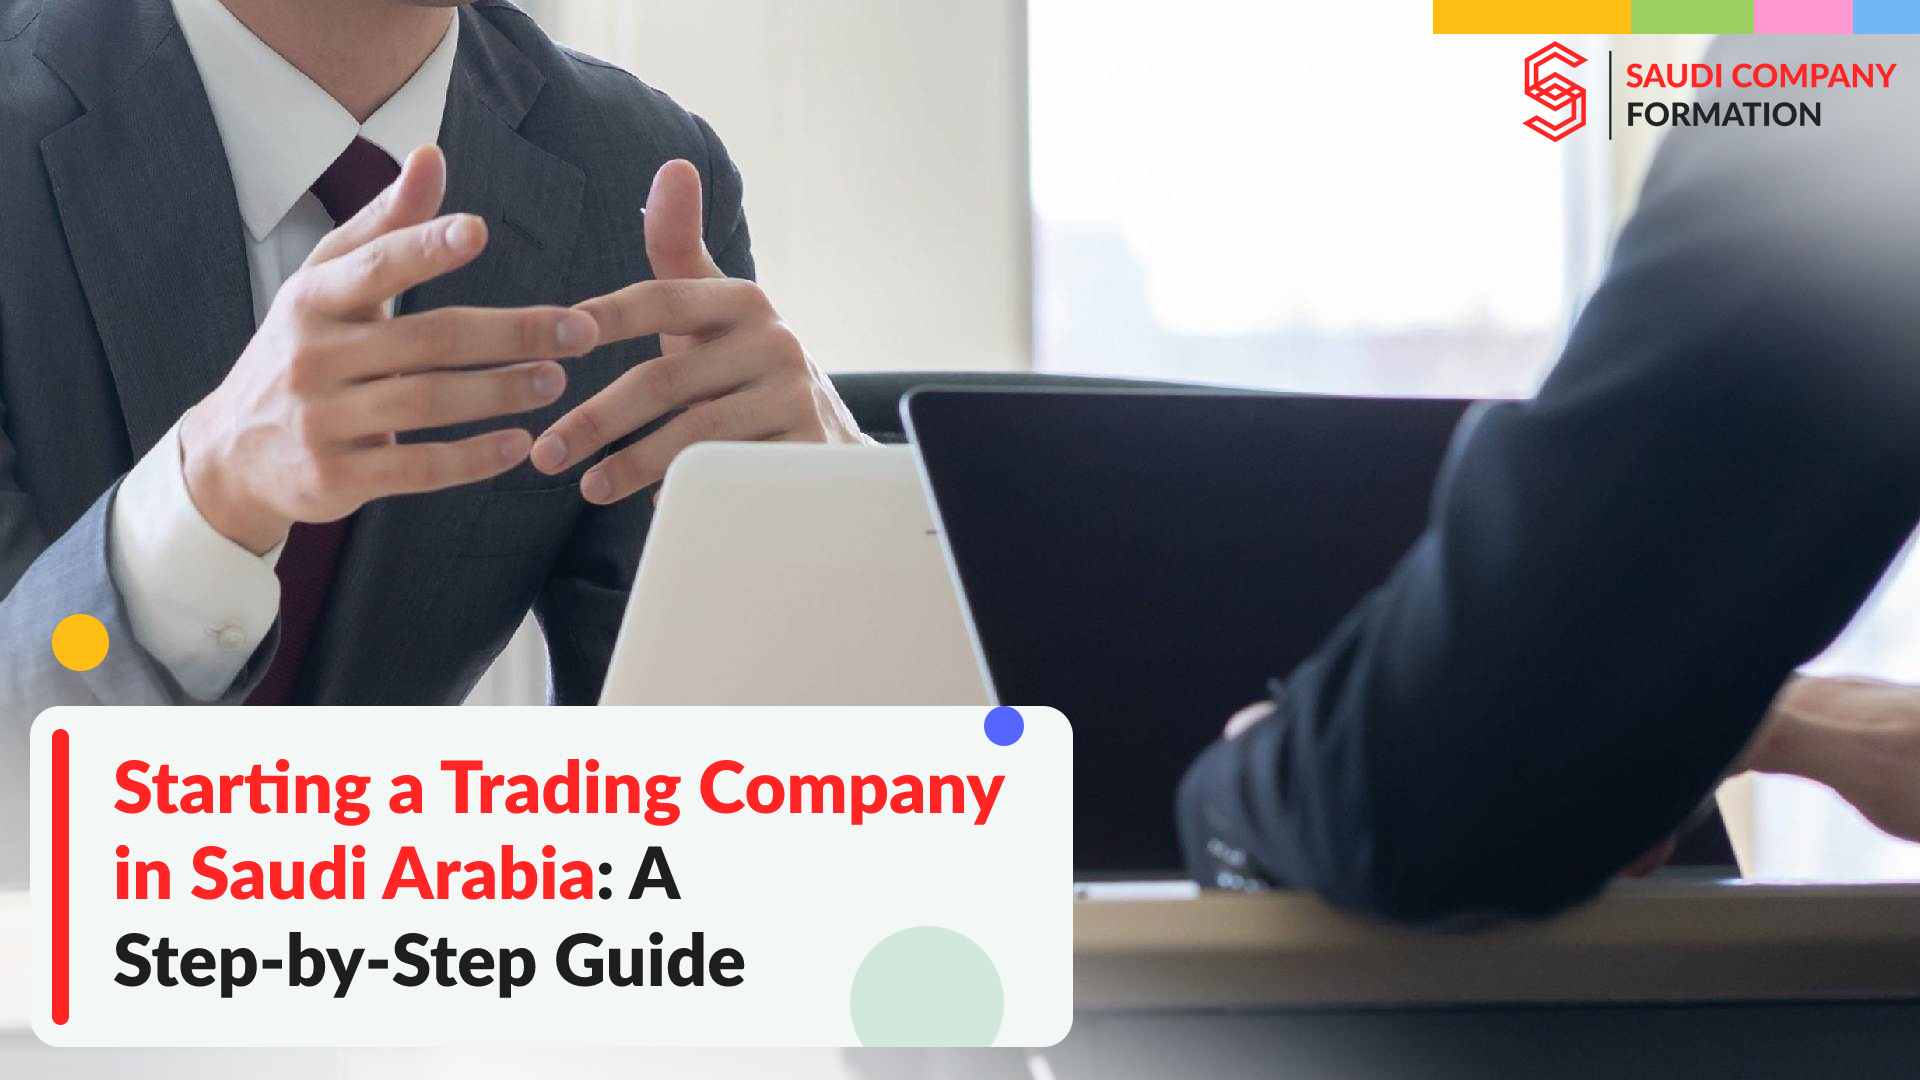 Starting a Trading Company in Saudi Arabia: A Step-by-Step Guide